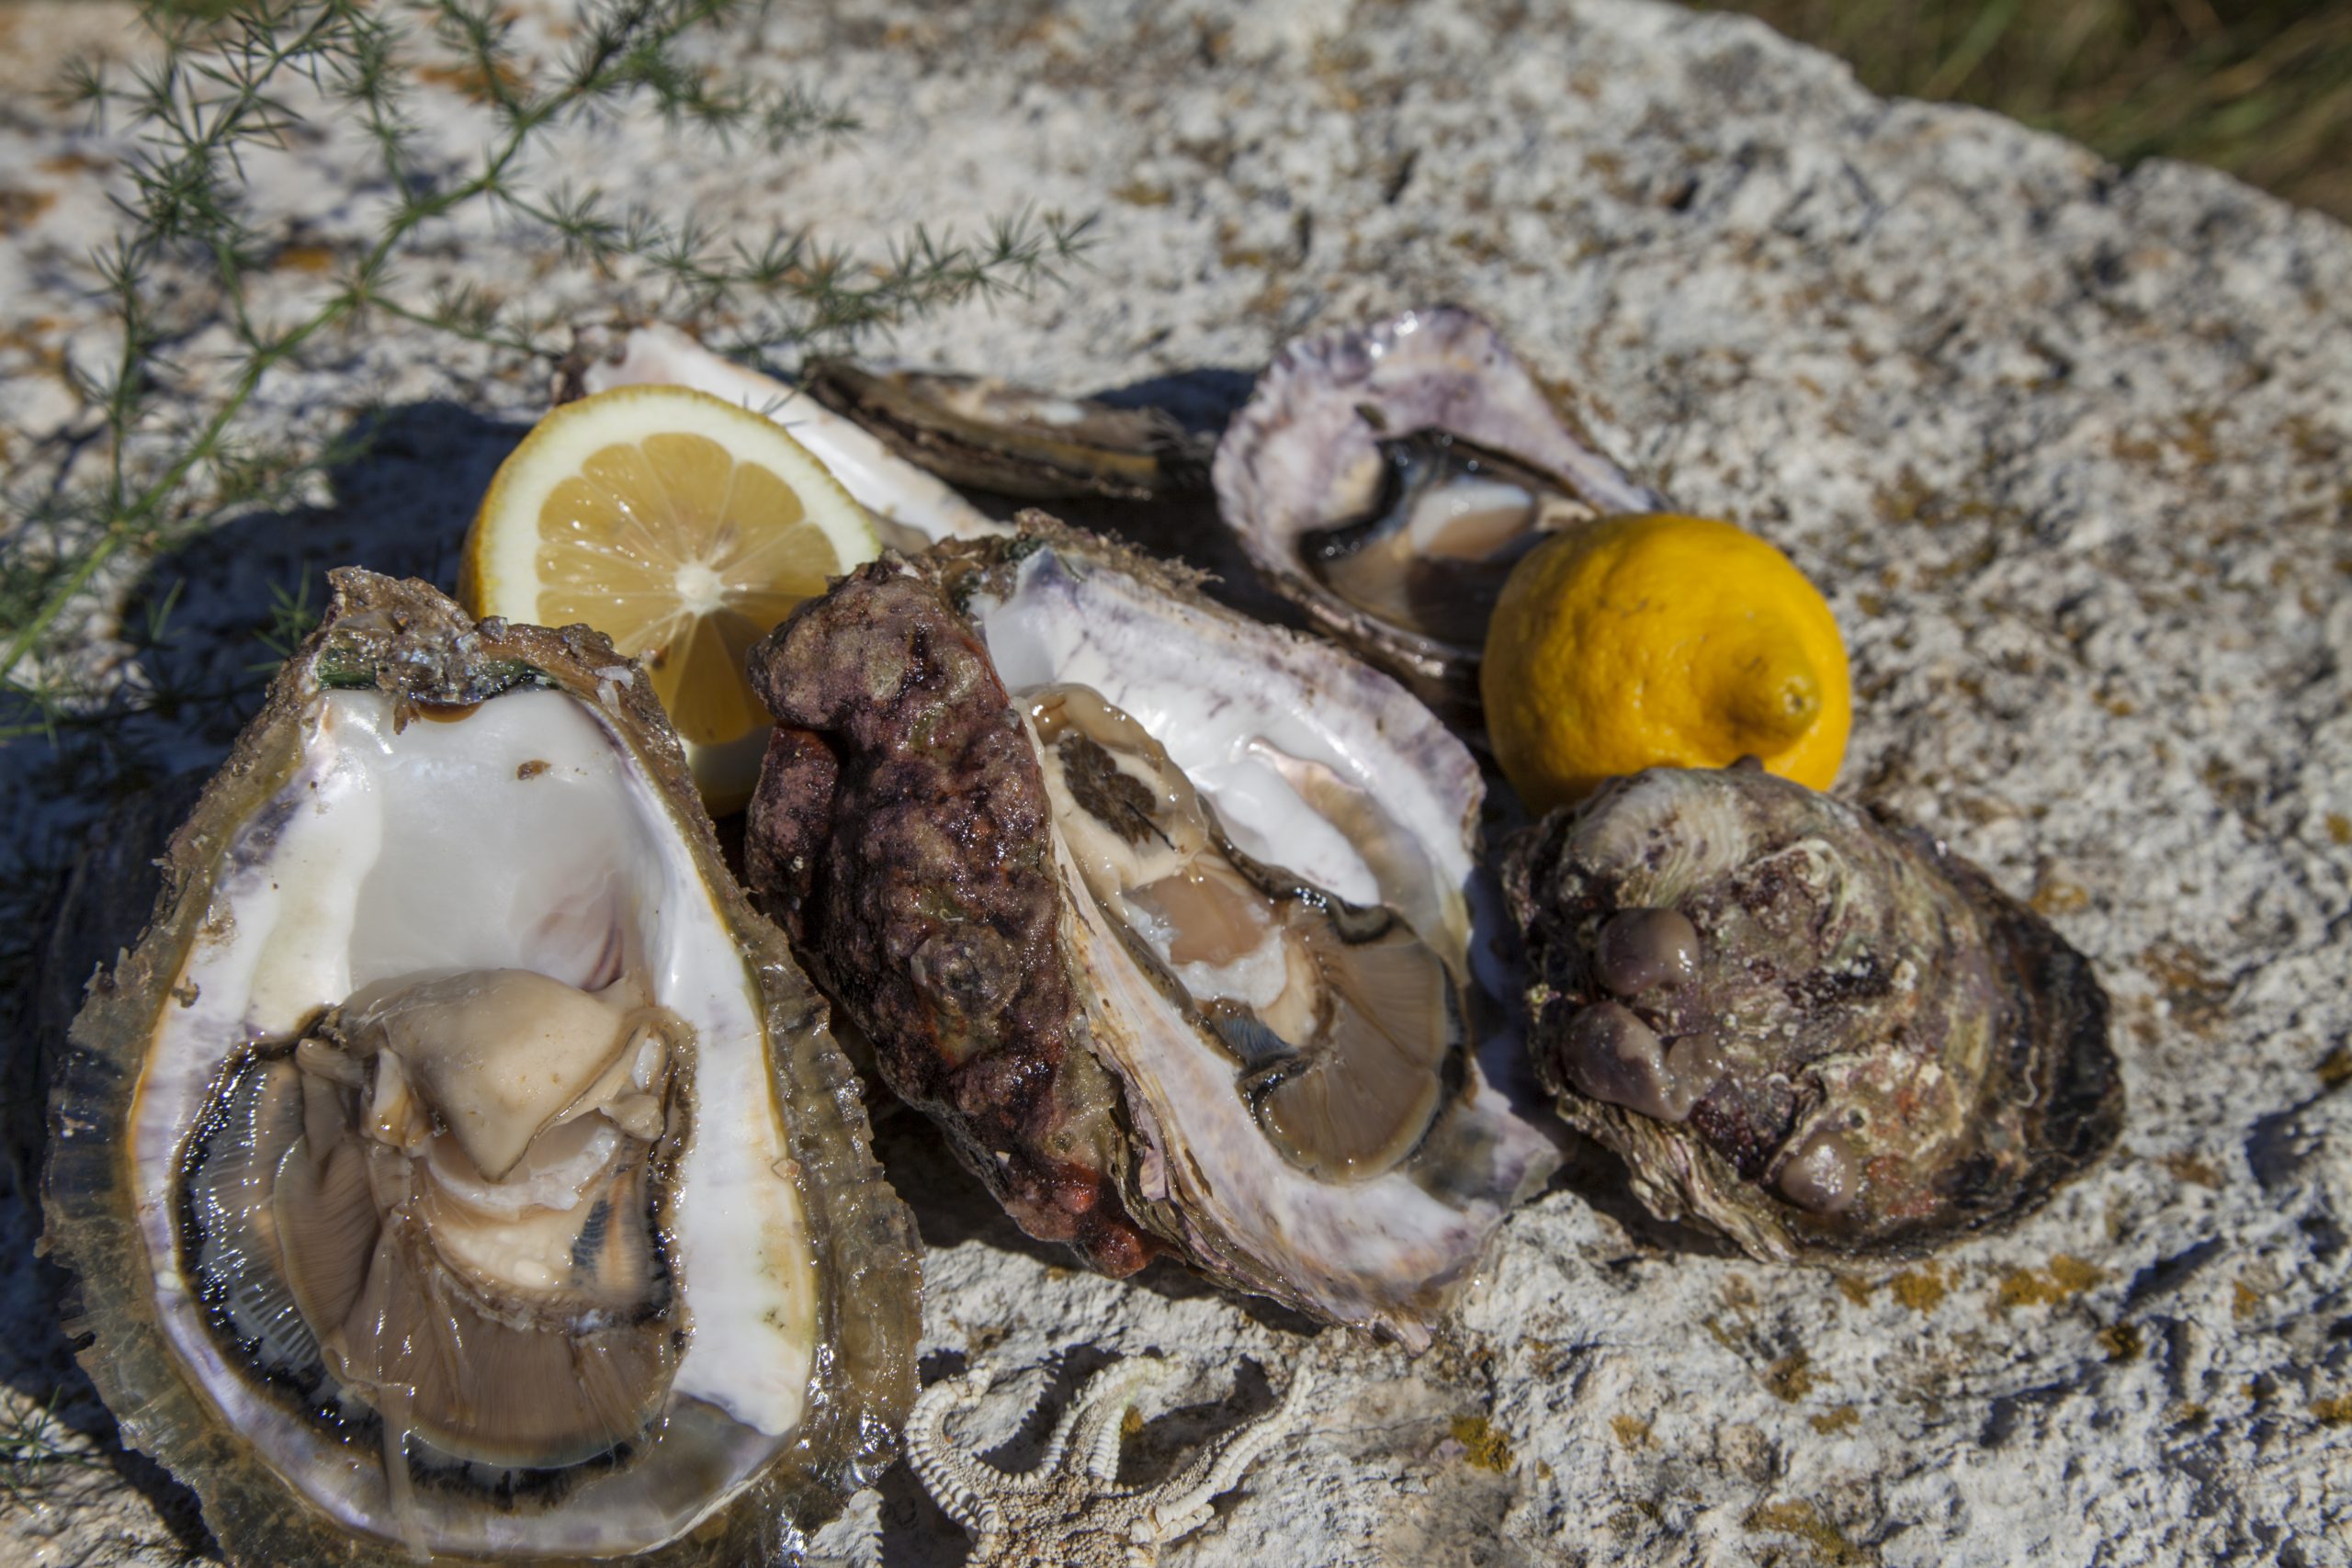 Oyster Tasting During The Wine And Oyster Tasting Experience At The Pelješac Peninsula